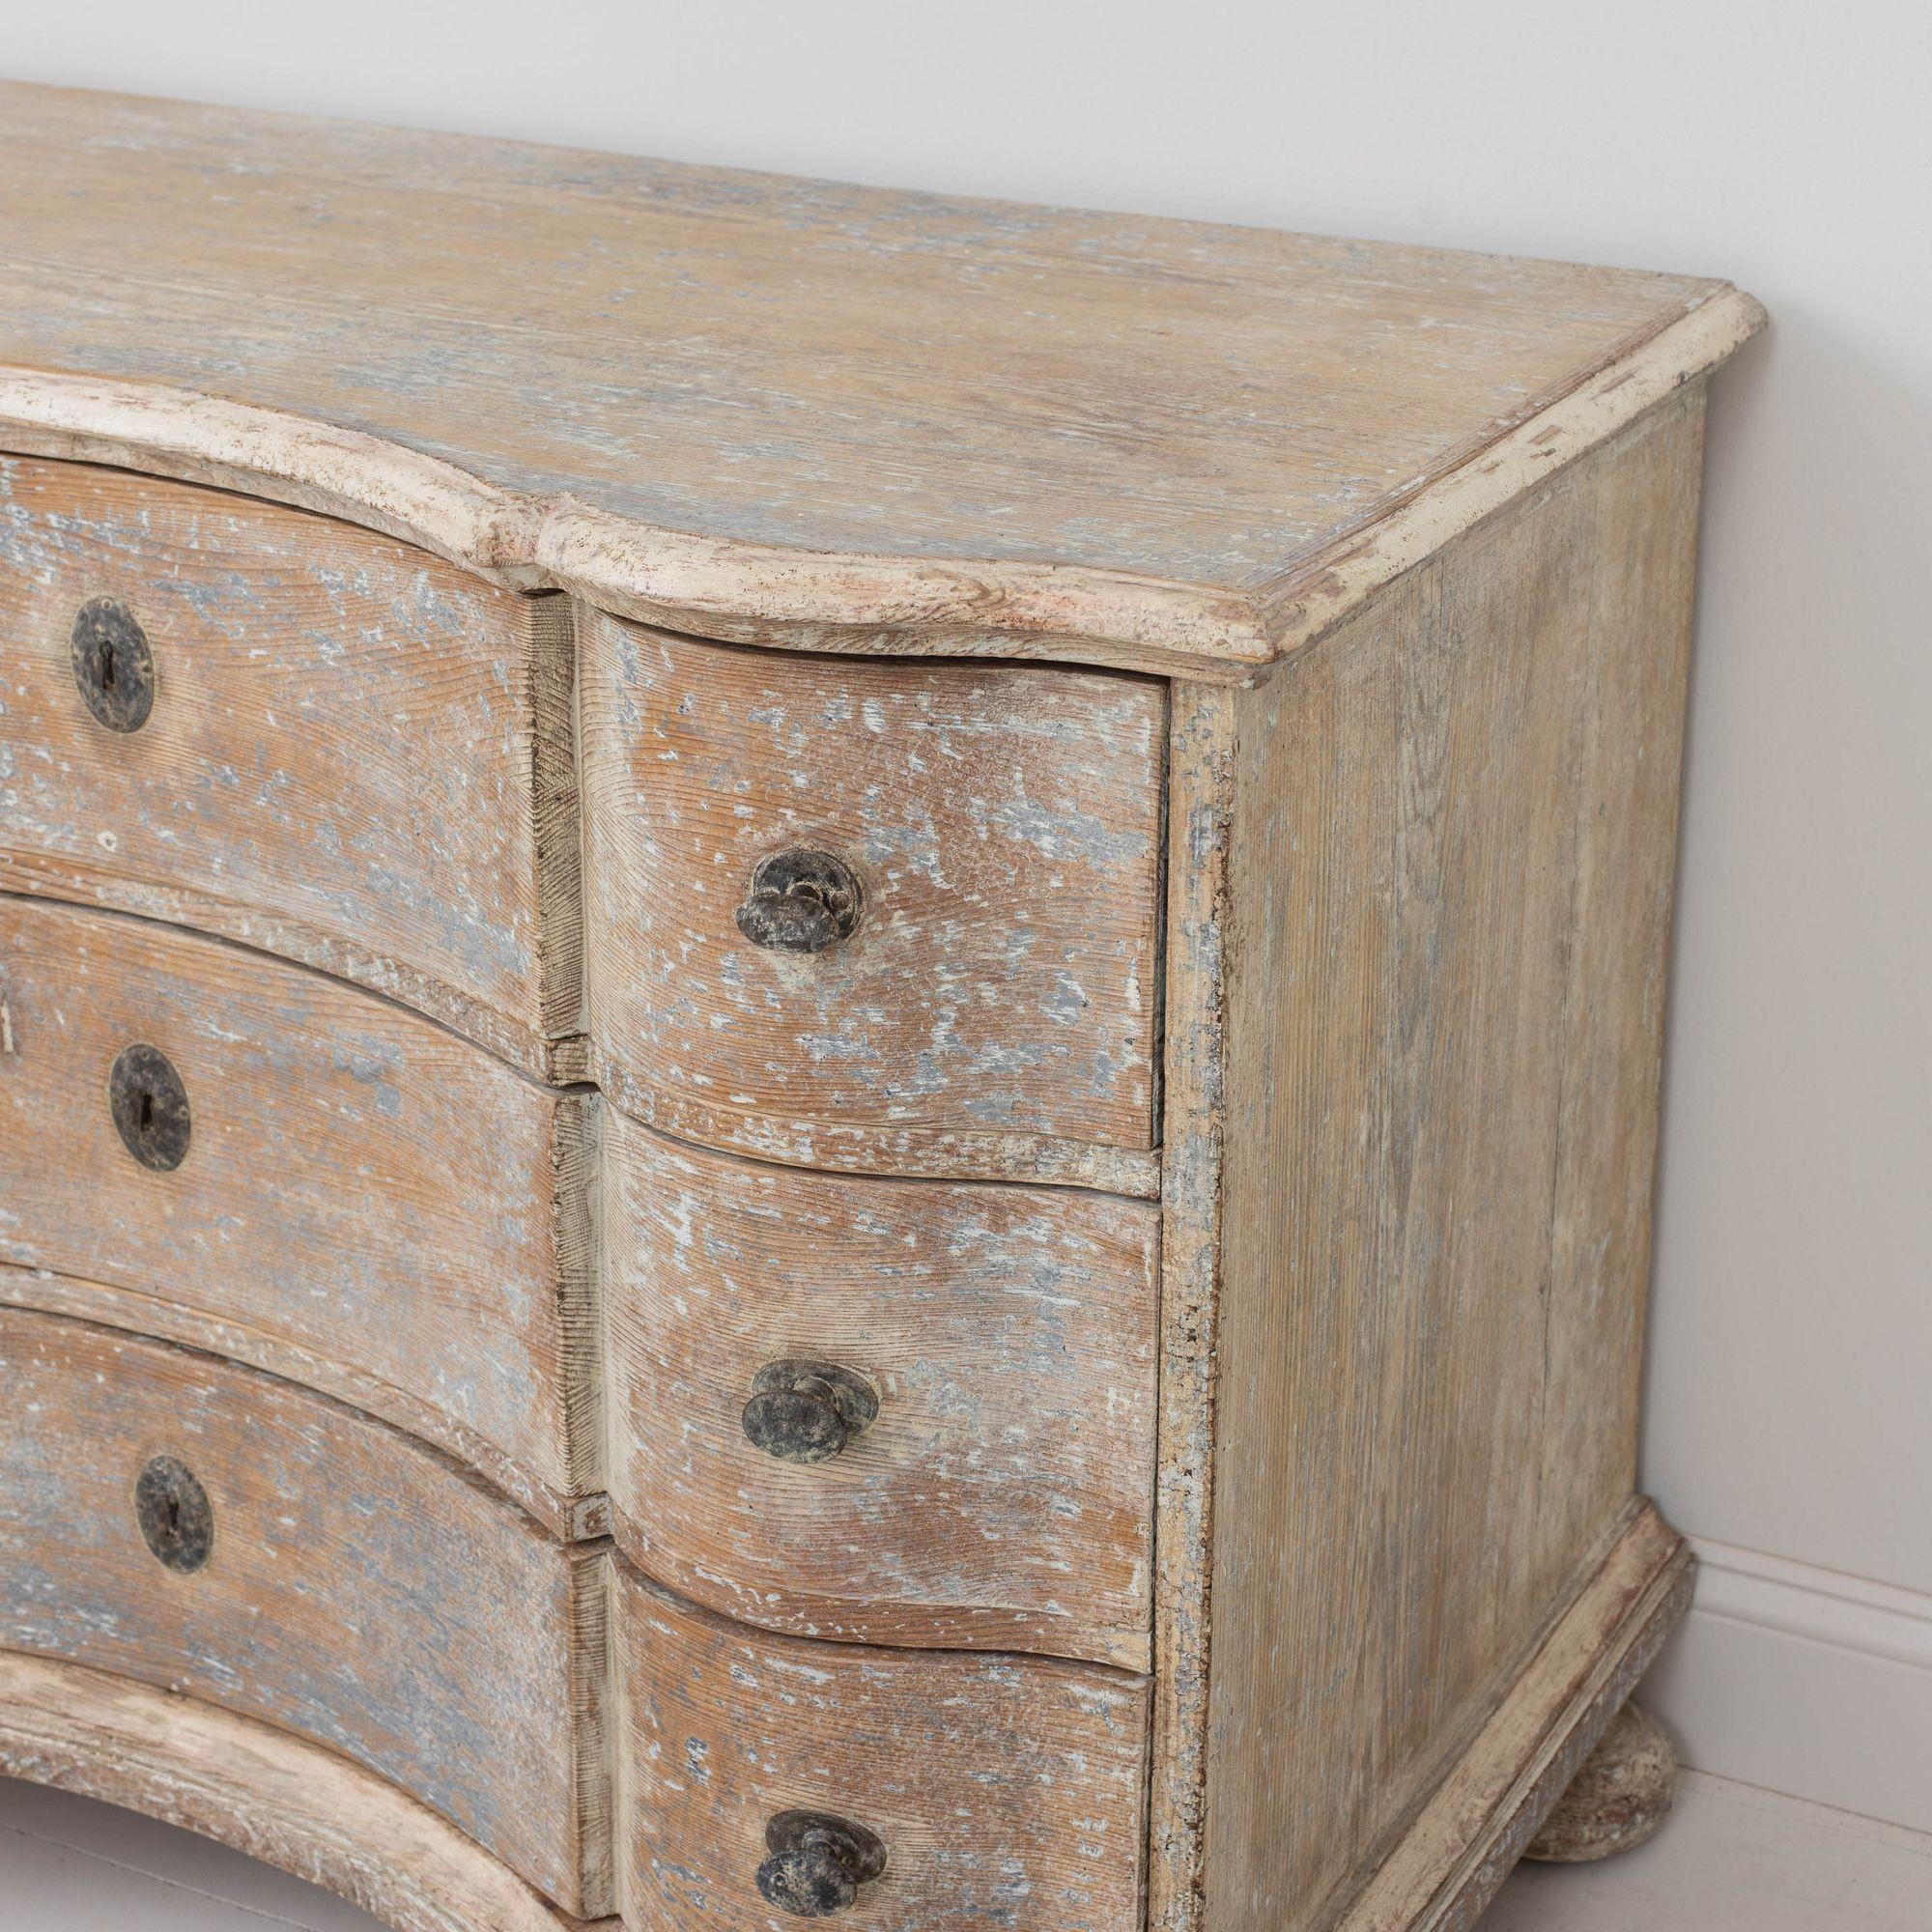 18th c. German Baroque Commode in Original Patina with Arbalette Shaped Front For Sale 5